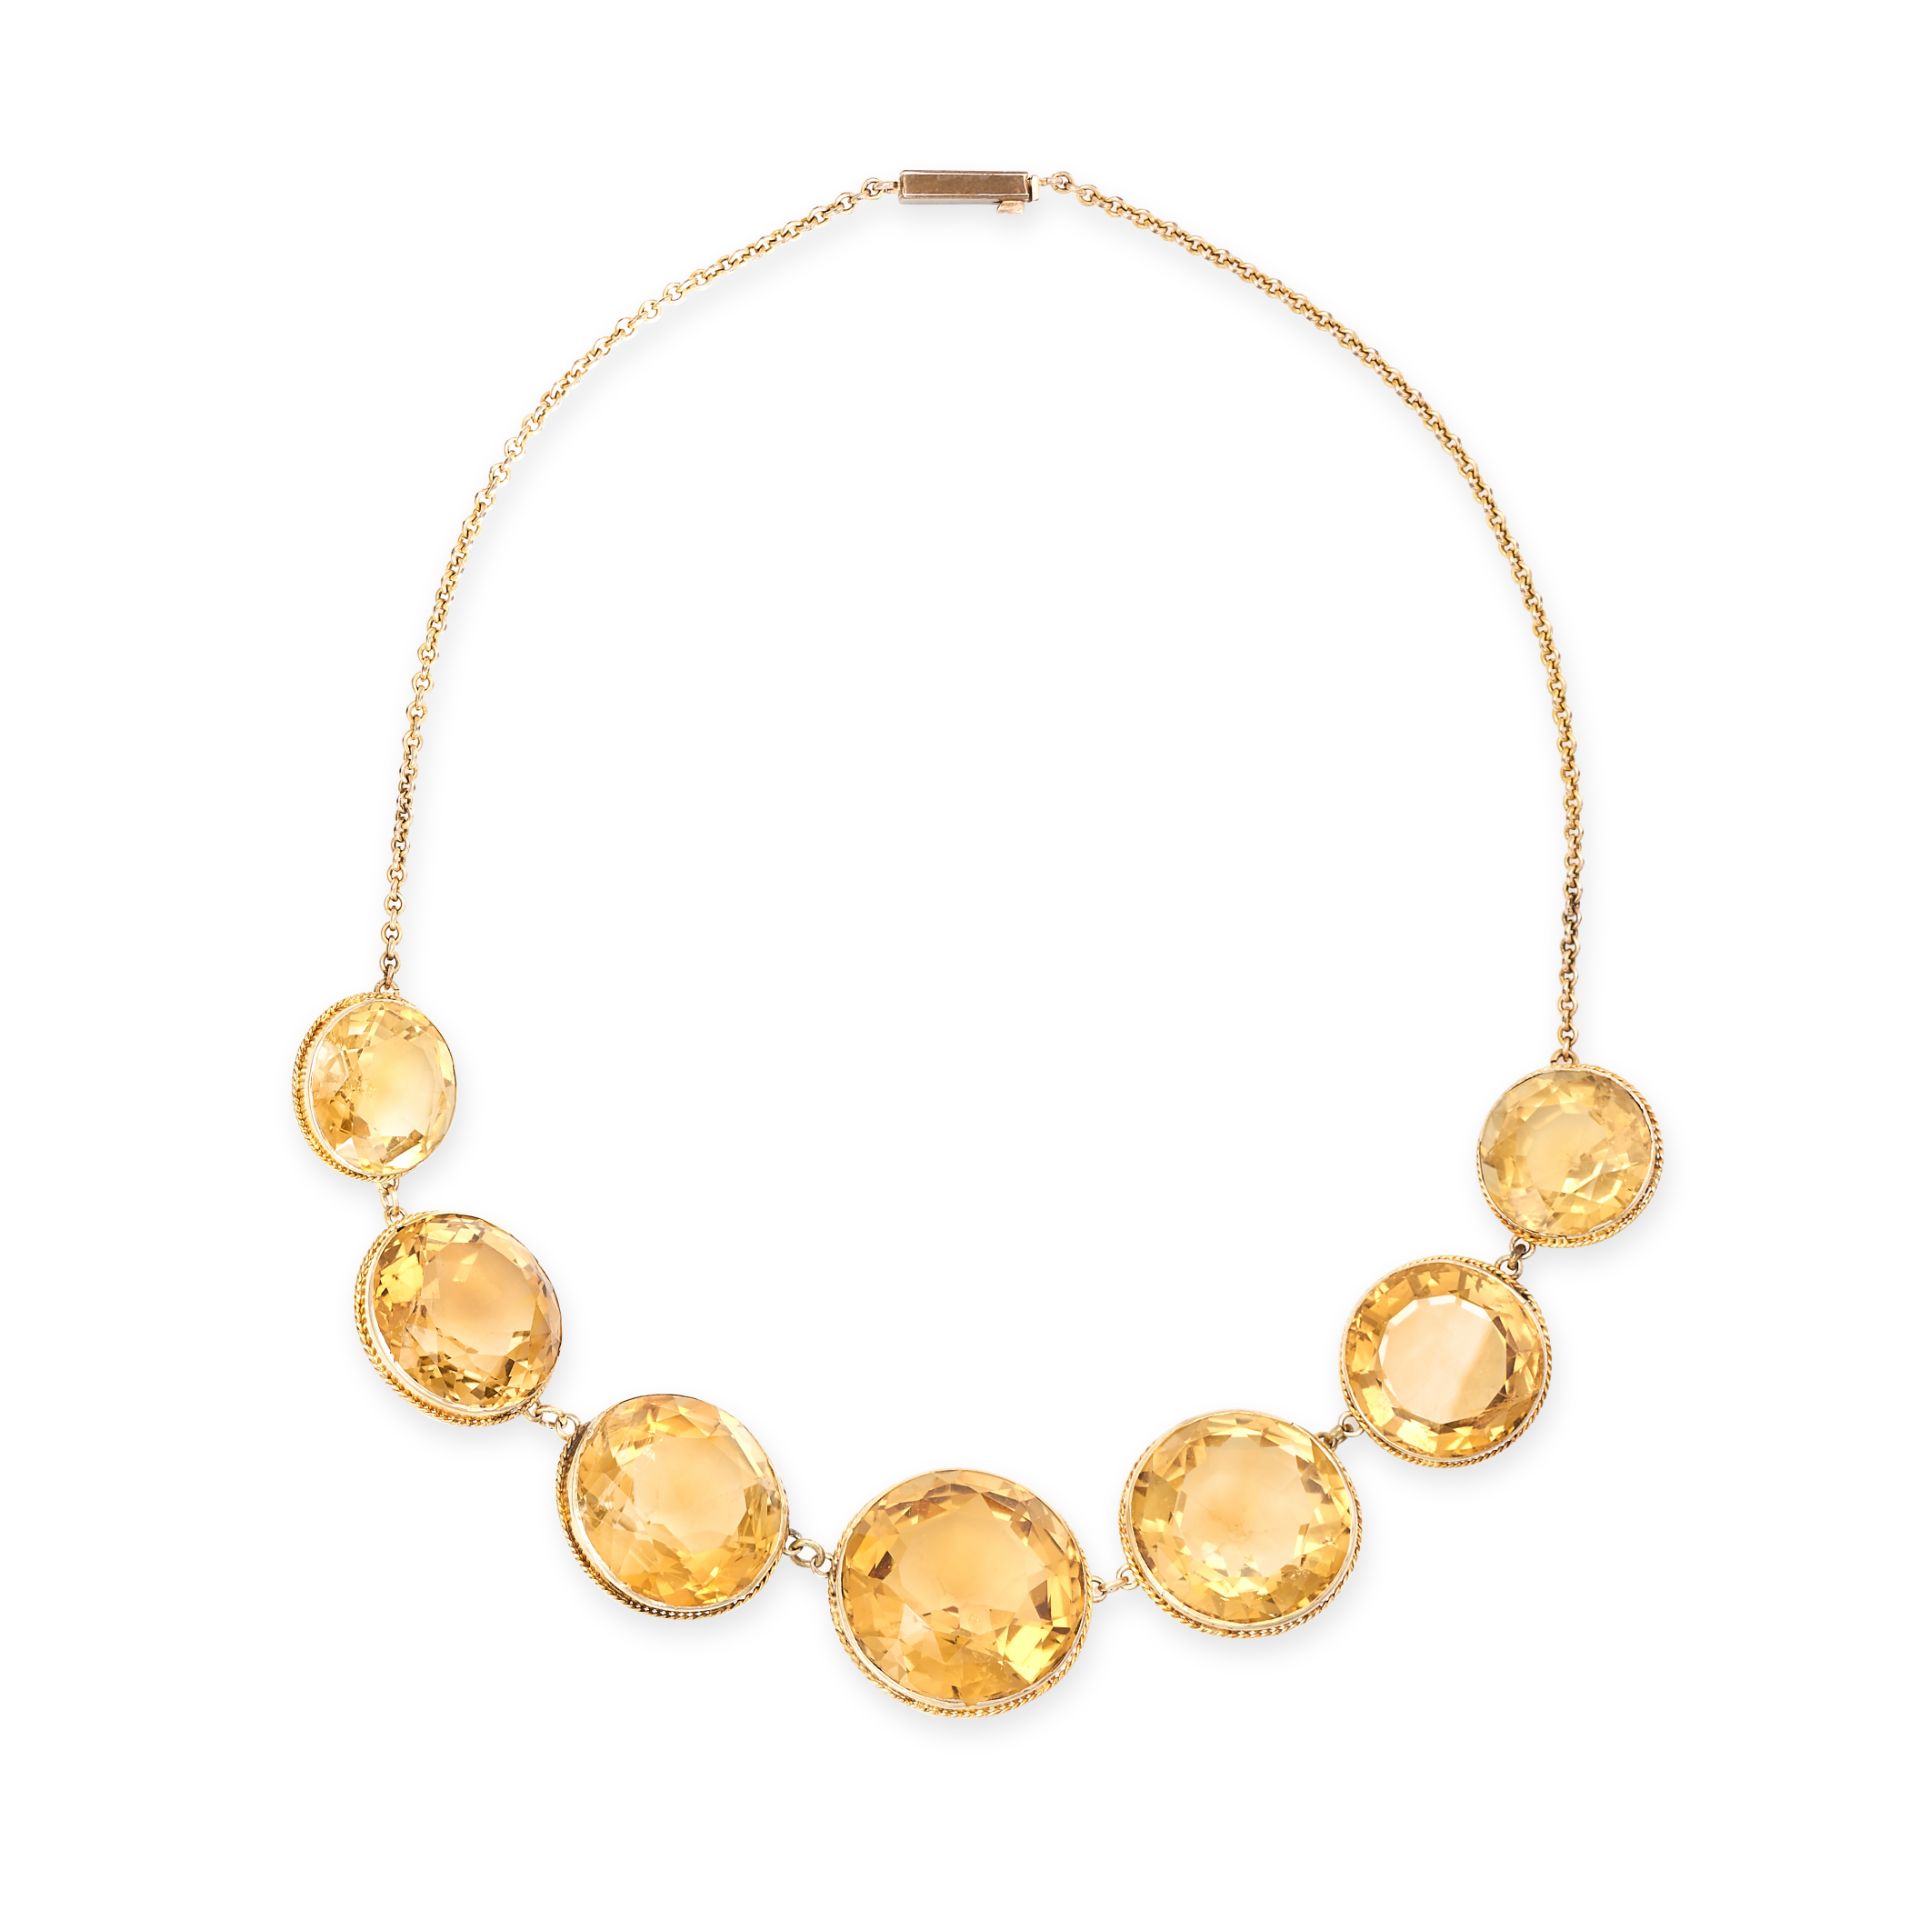 AN ANTIQUE CITRINE NECKLACE in yellow gold, set with seven large round cut citrines in twisted go...